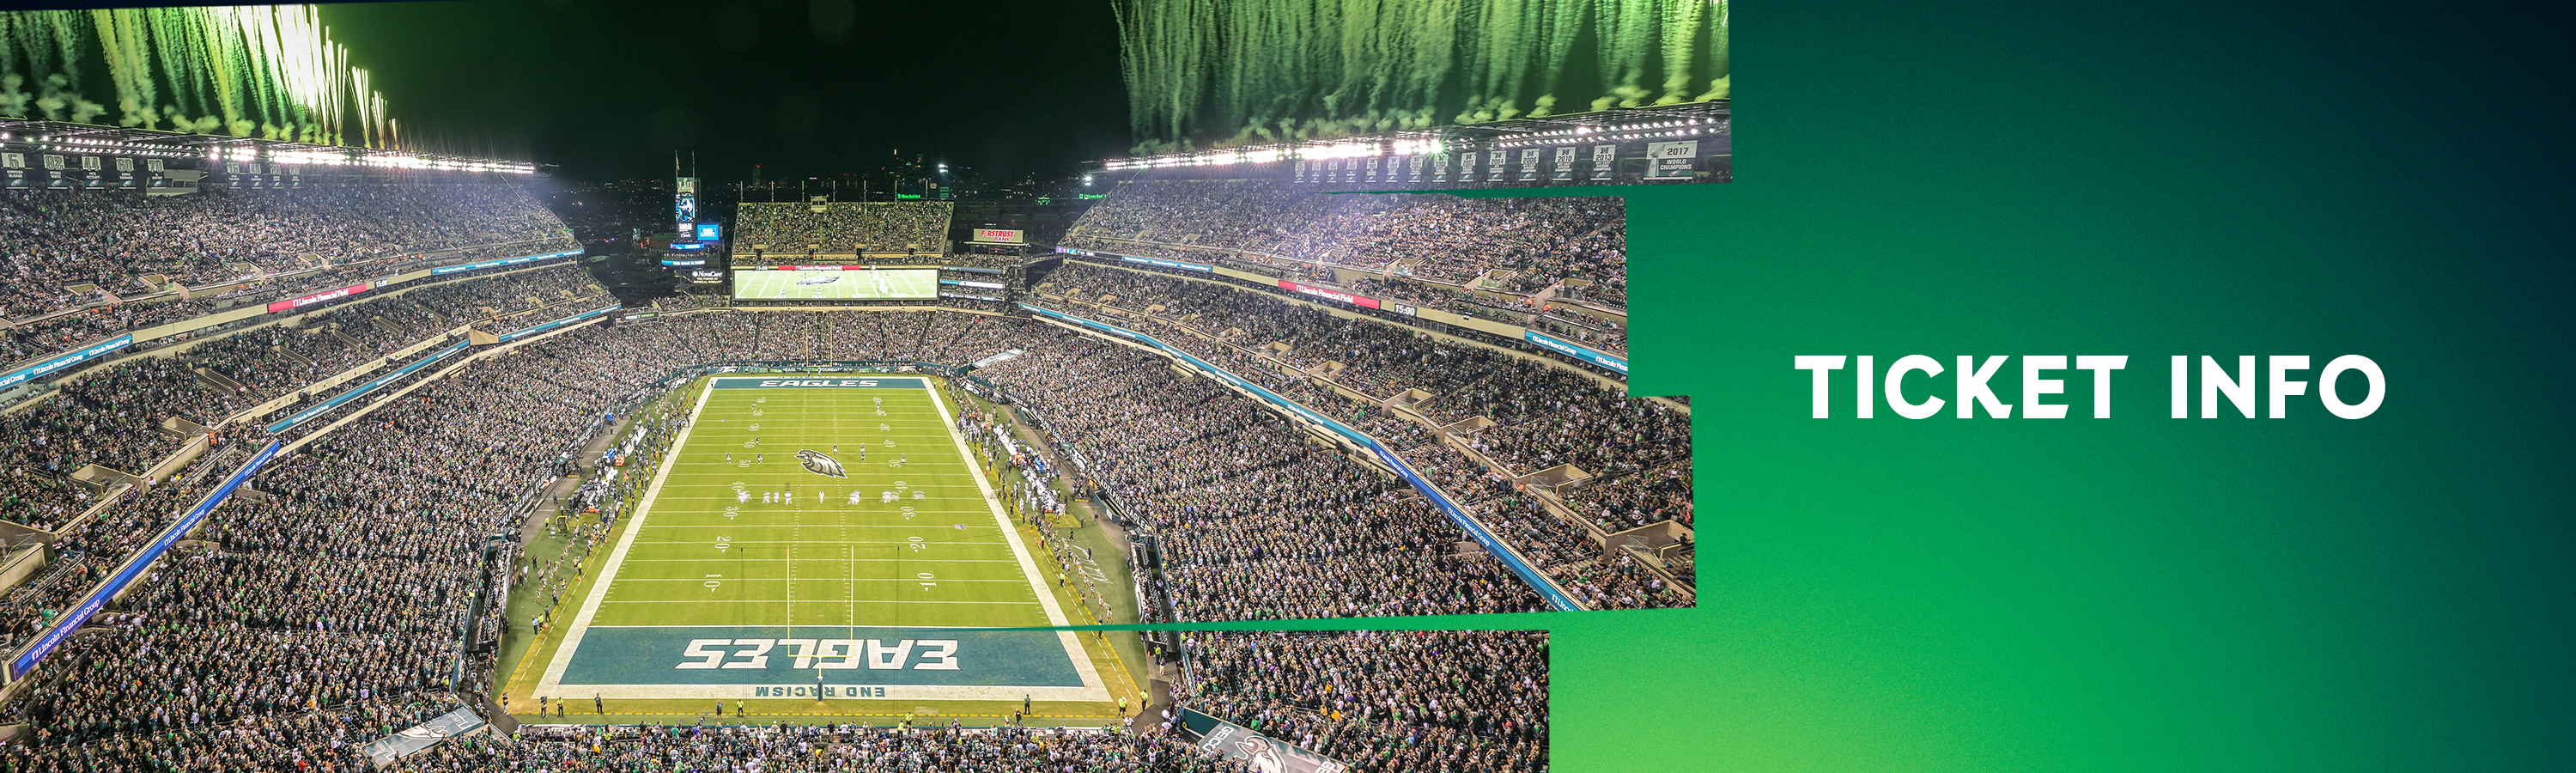 nfc championship eagles tickets